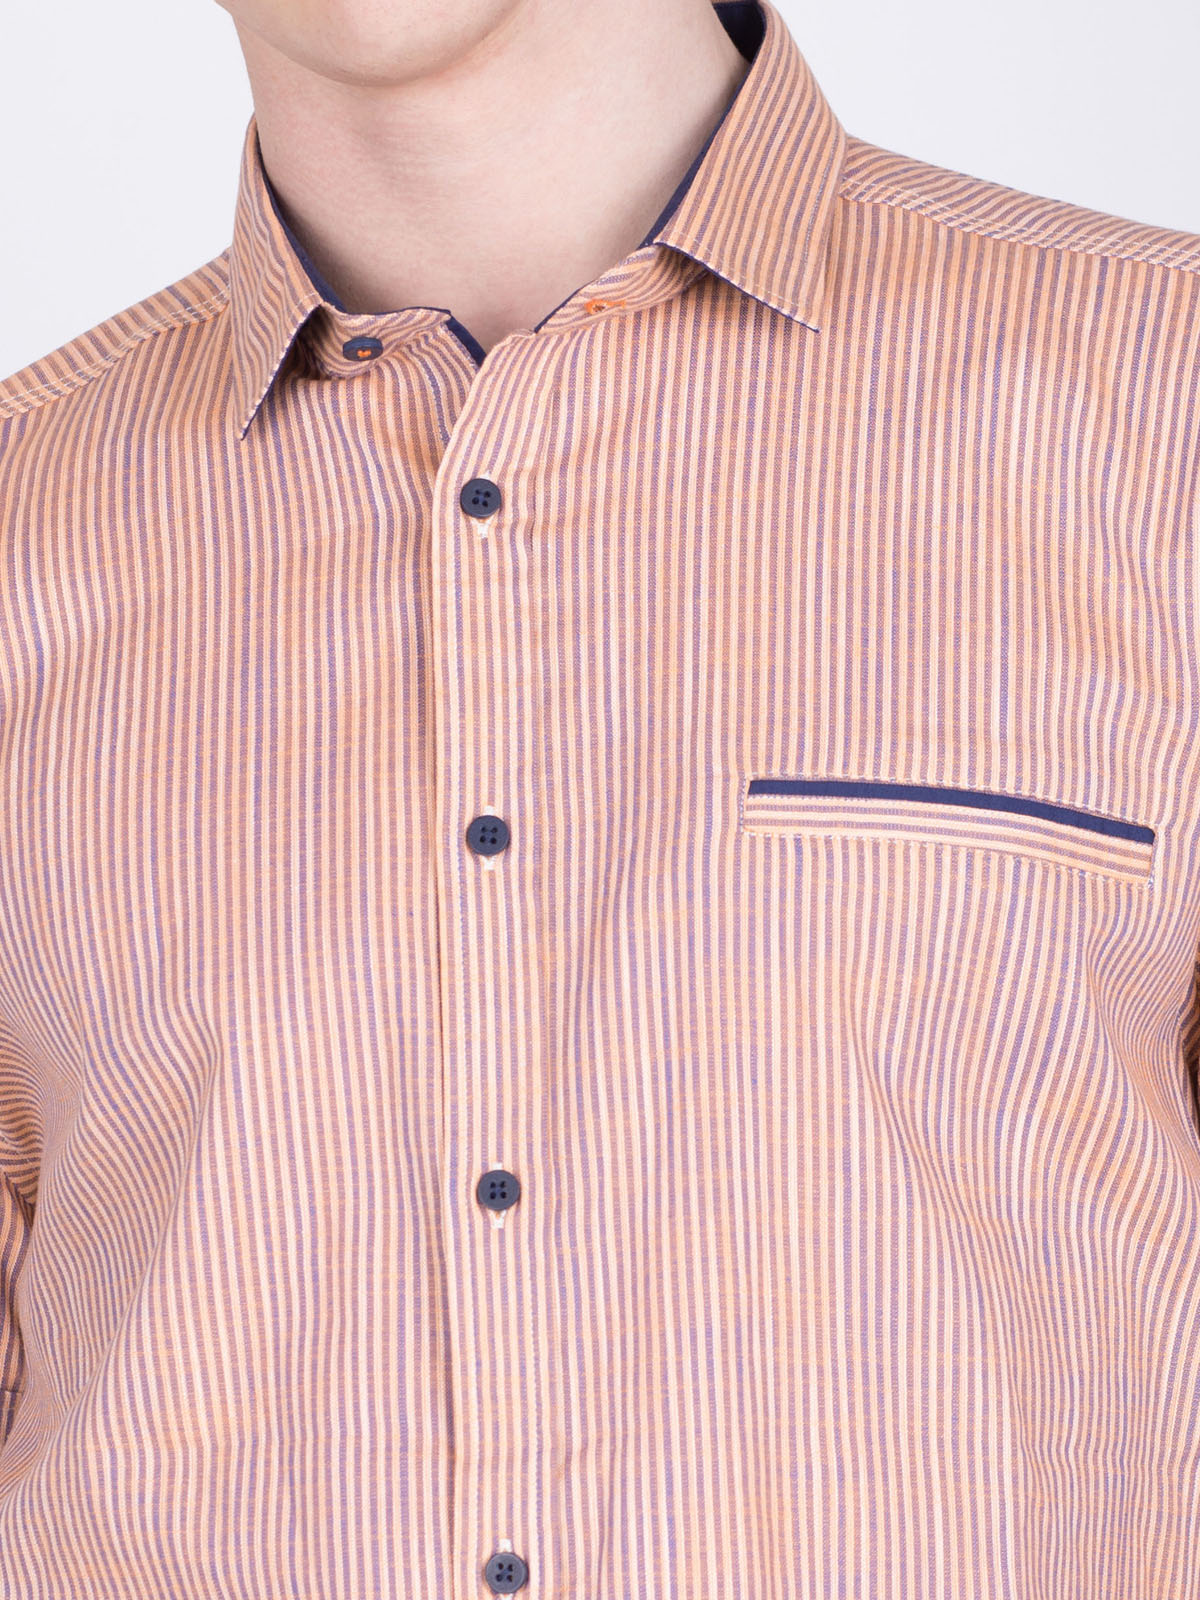 Shirt with linen in orange on blue stri - 80211 € 21.93 img4